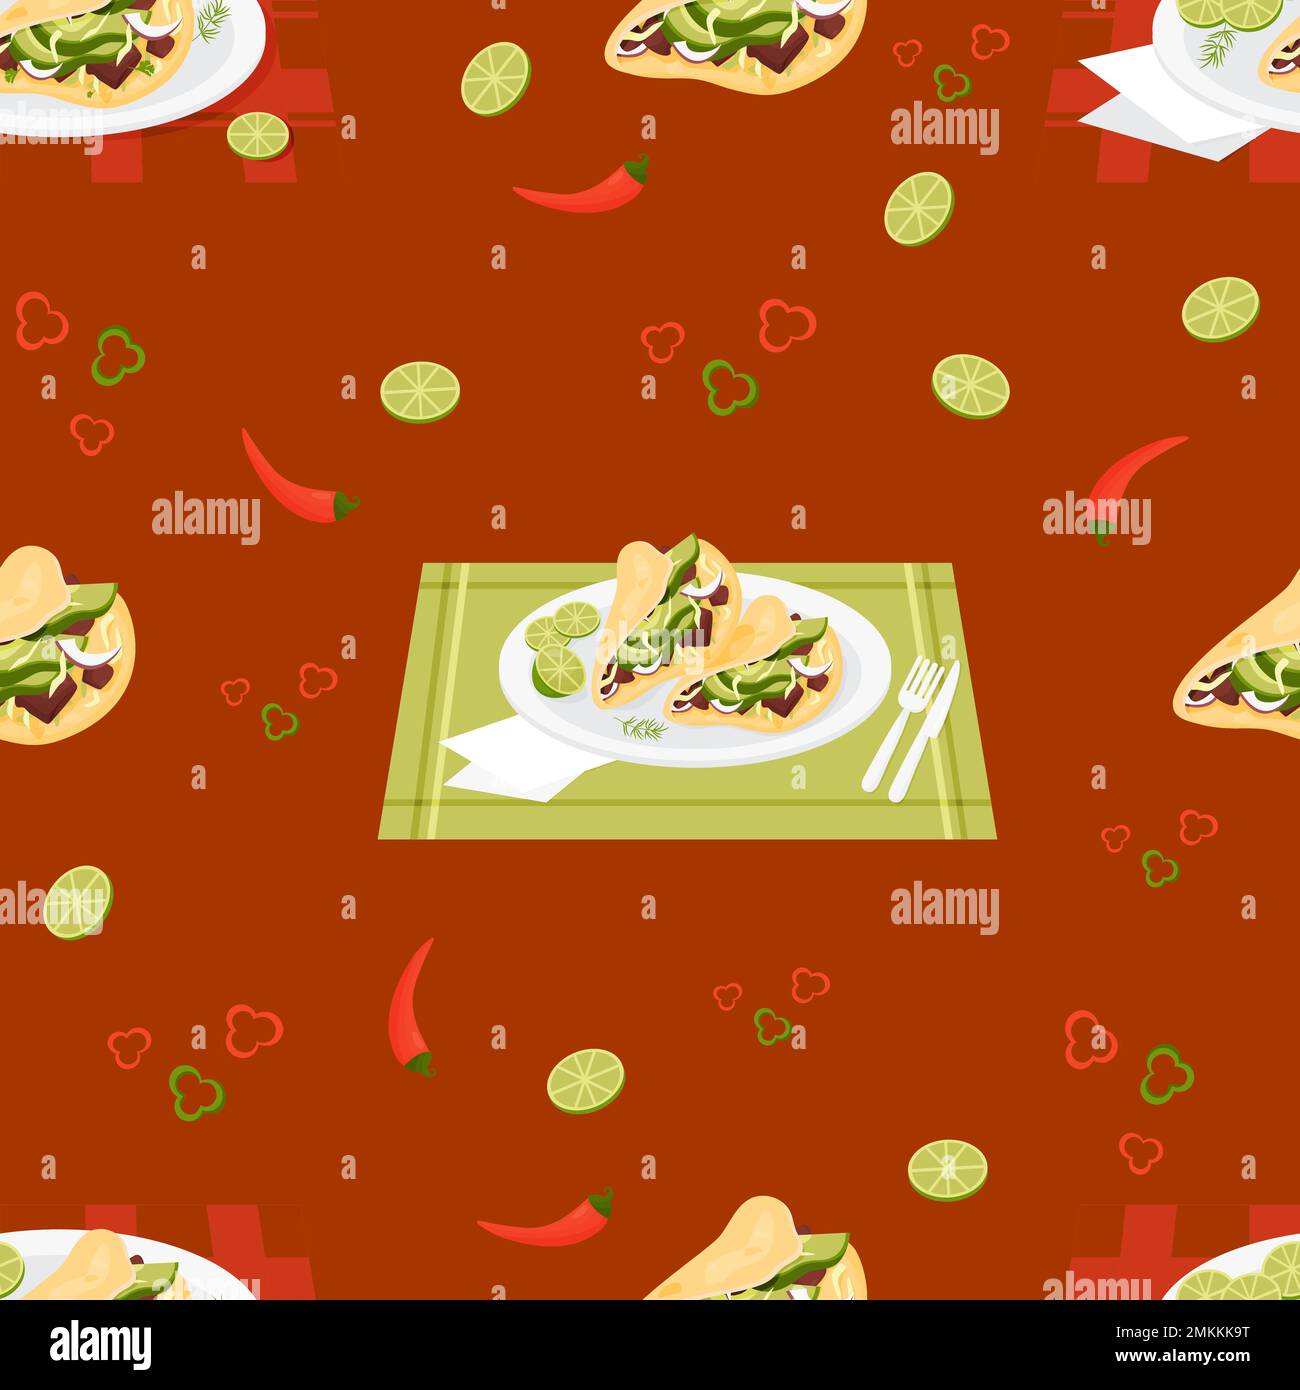 Seamless pattern with Mexican Tacos. latin american food in plate on burgundy background with chili peppers and lime slices. Vector illustration. Endl Stock Vector